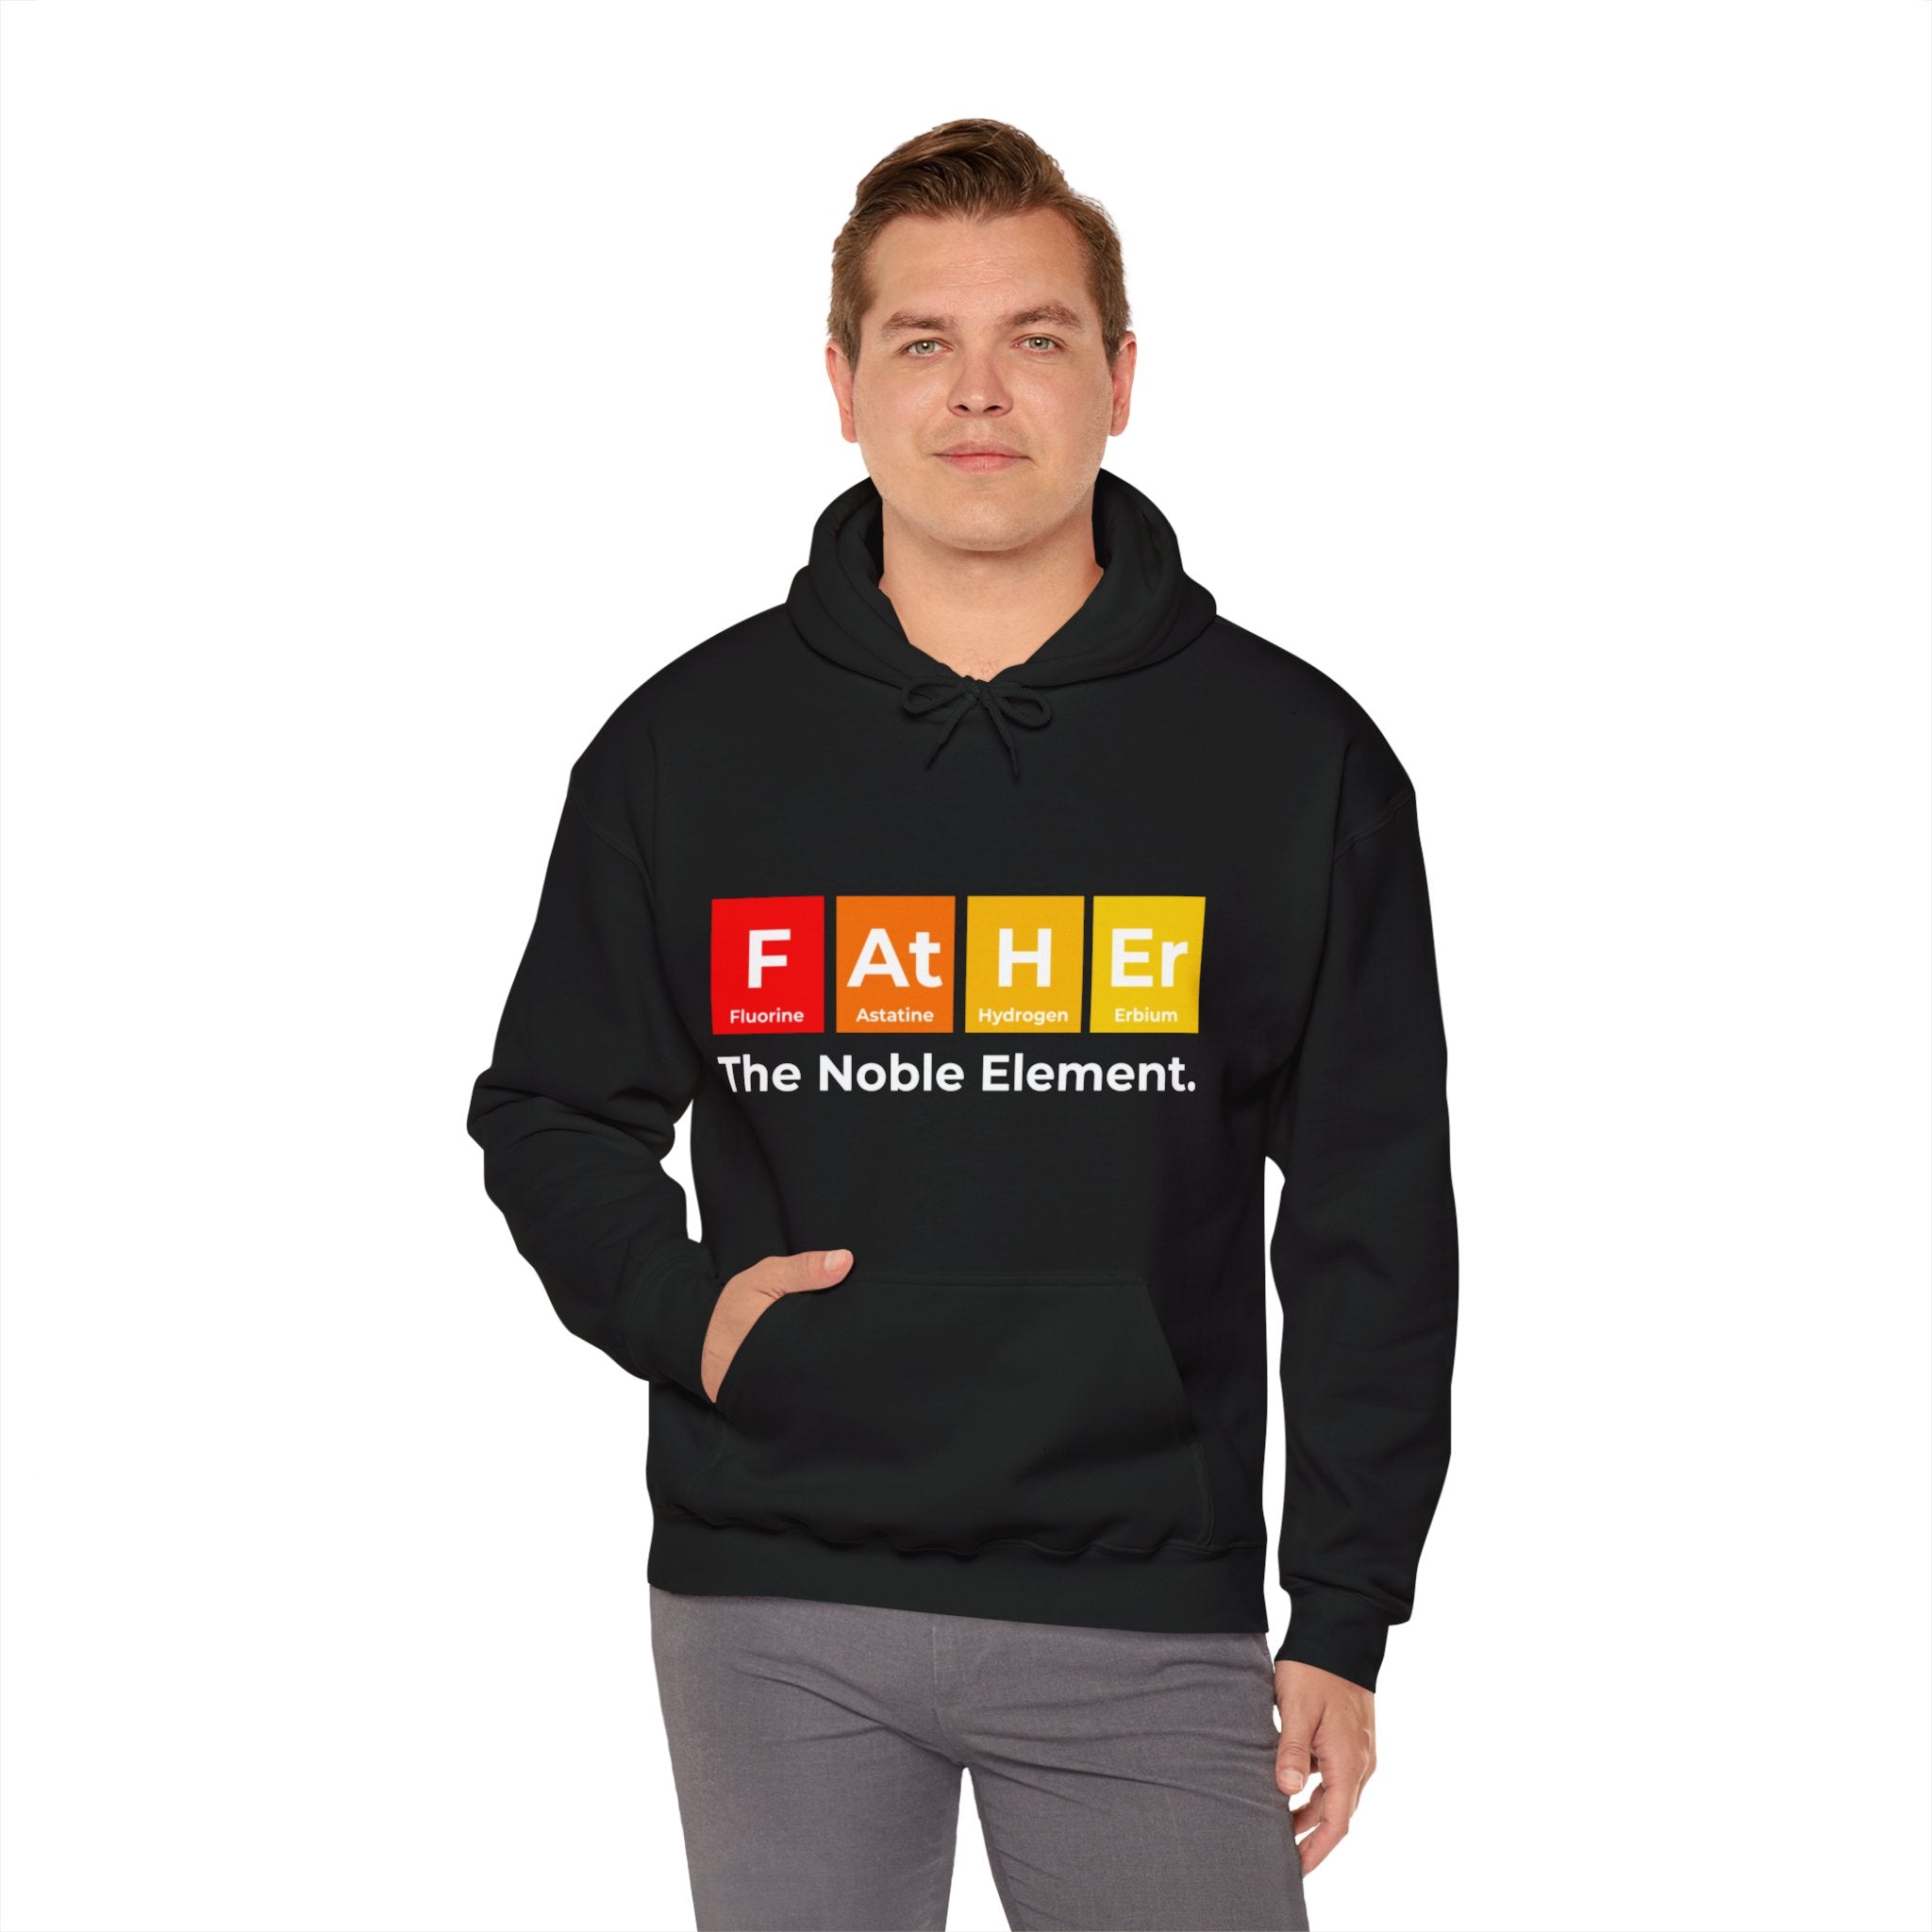 A man is wearing a Father Graphic - Hooded Sweatshirt that reads, "FATHER: The Noble Element," with a periodic table design using elements Fluorine (F), Astatine (At), Hydrogen (H), and Erbium (Er).